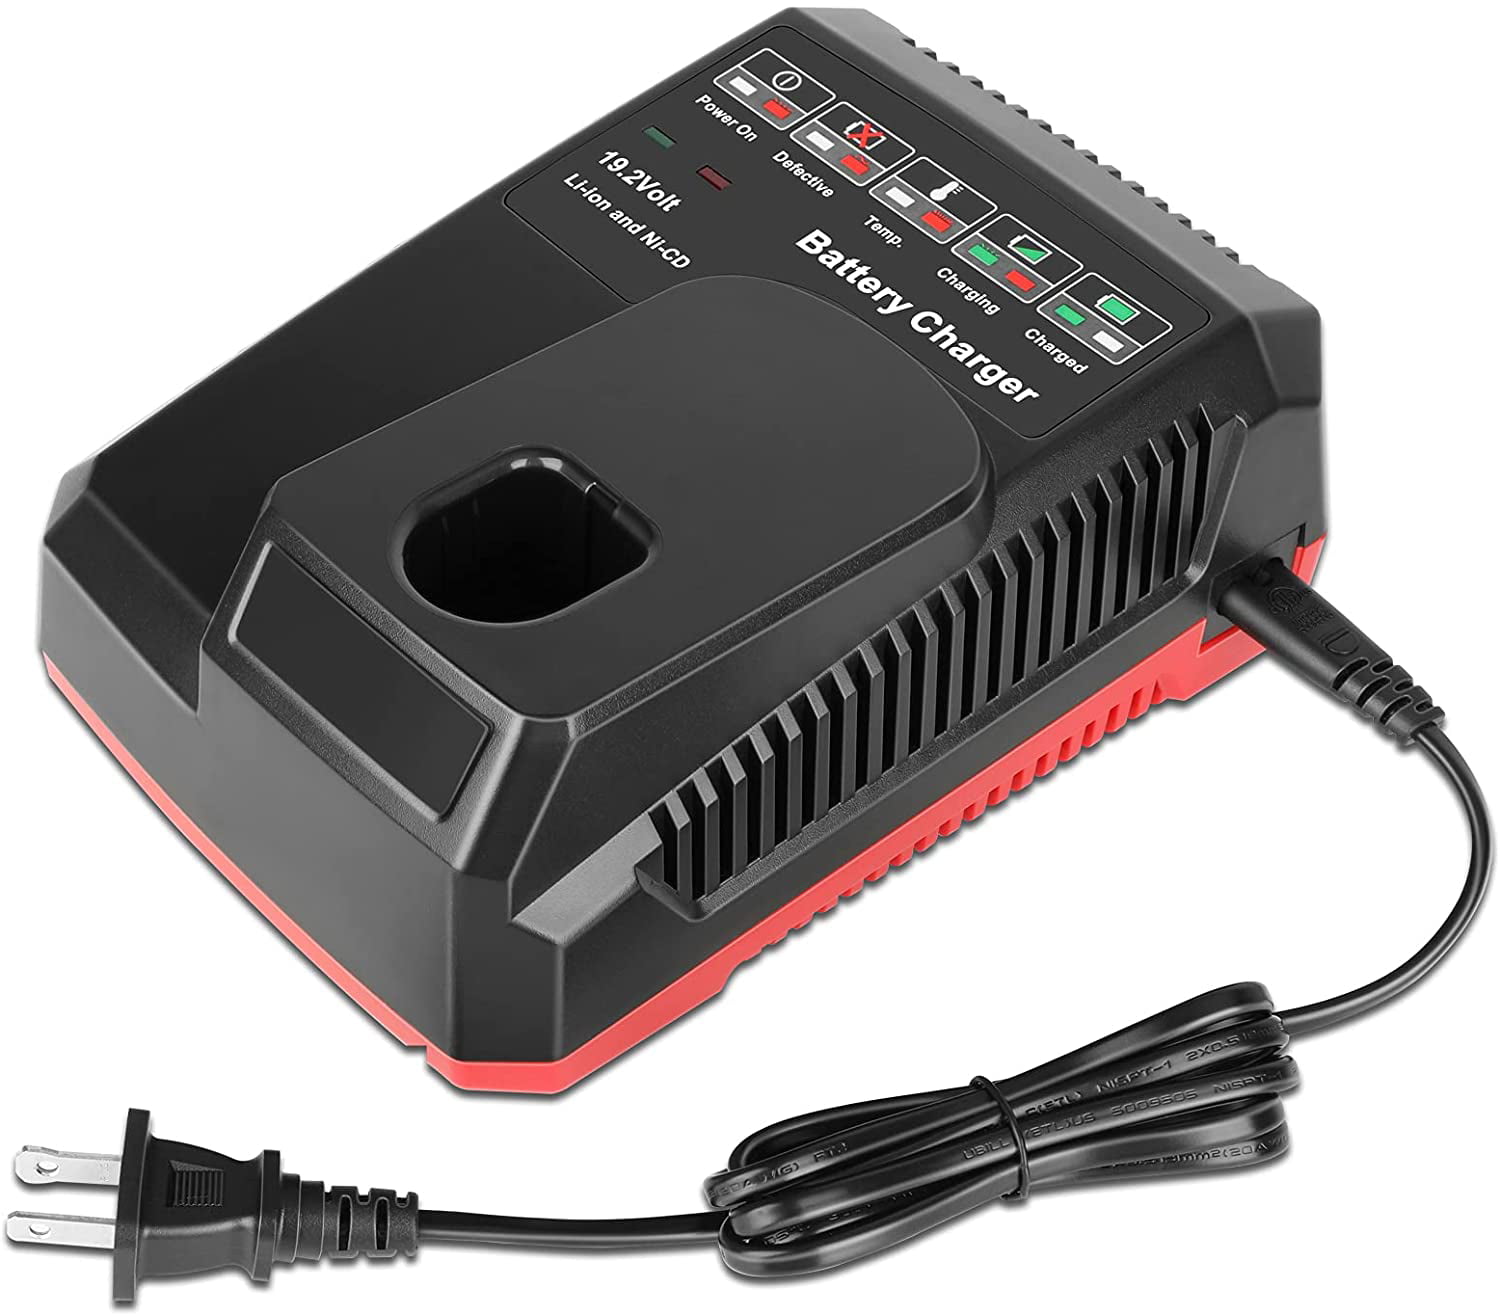 19.2 Volt XCP For Craftsman C3 Lithium-Ion Battery/Charger 11375 11376 130279005 